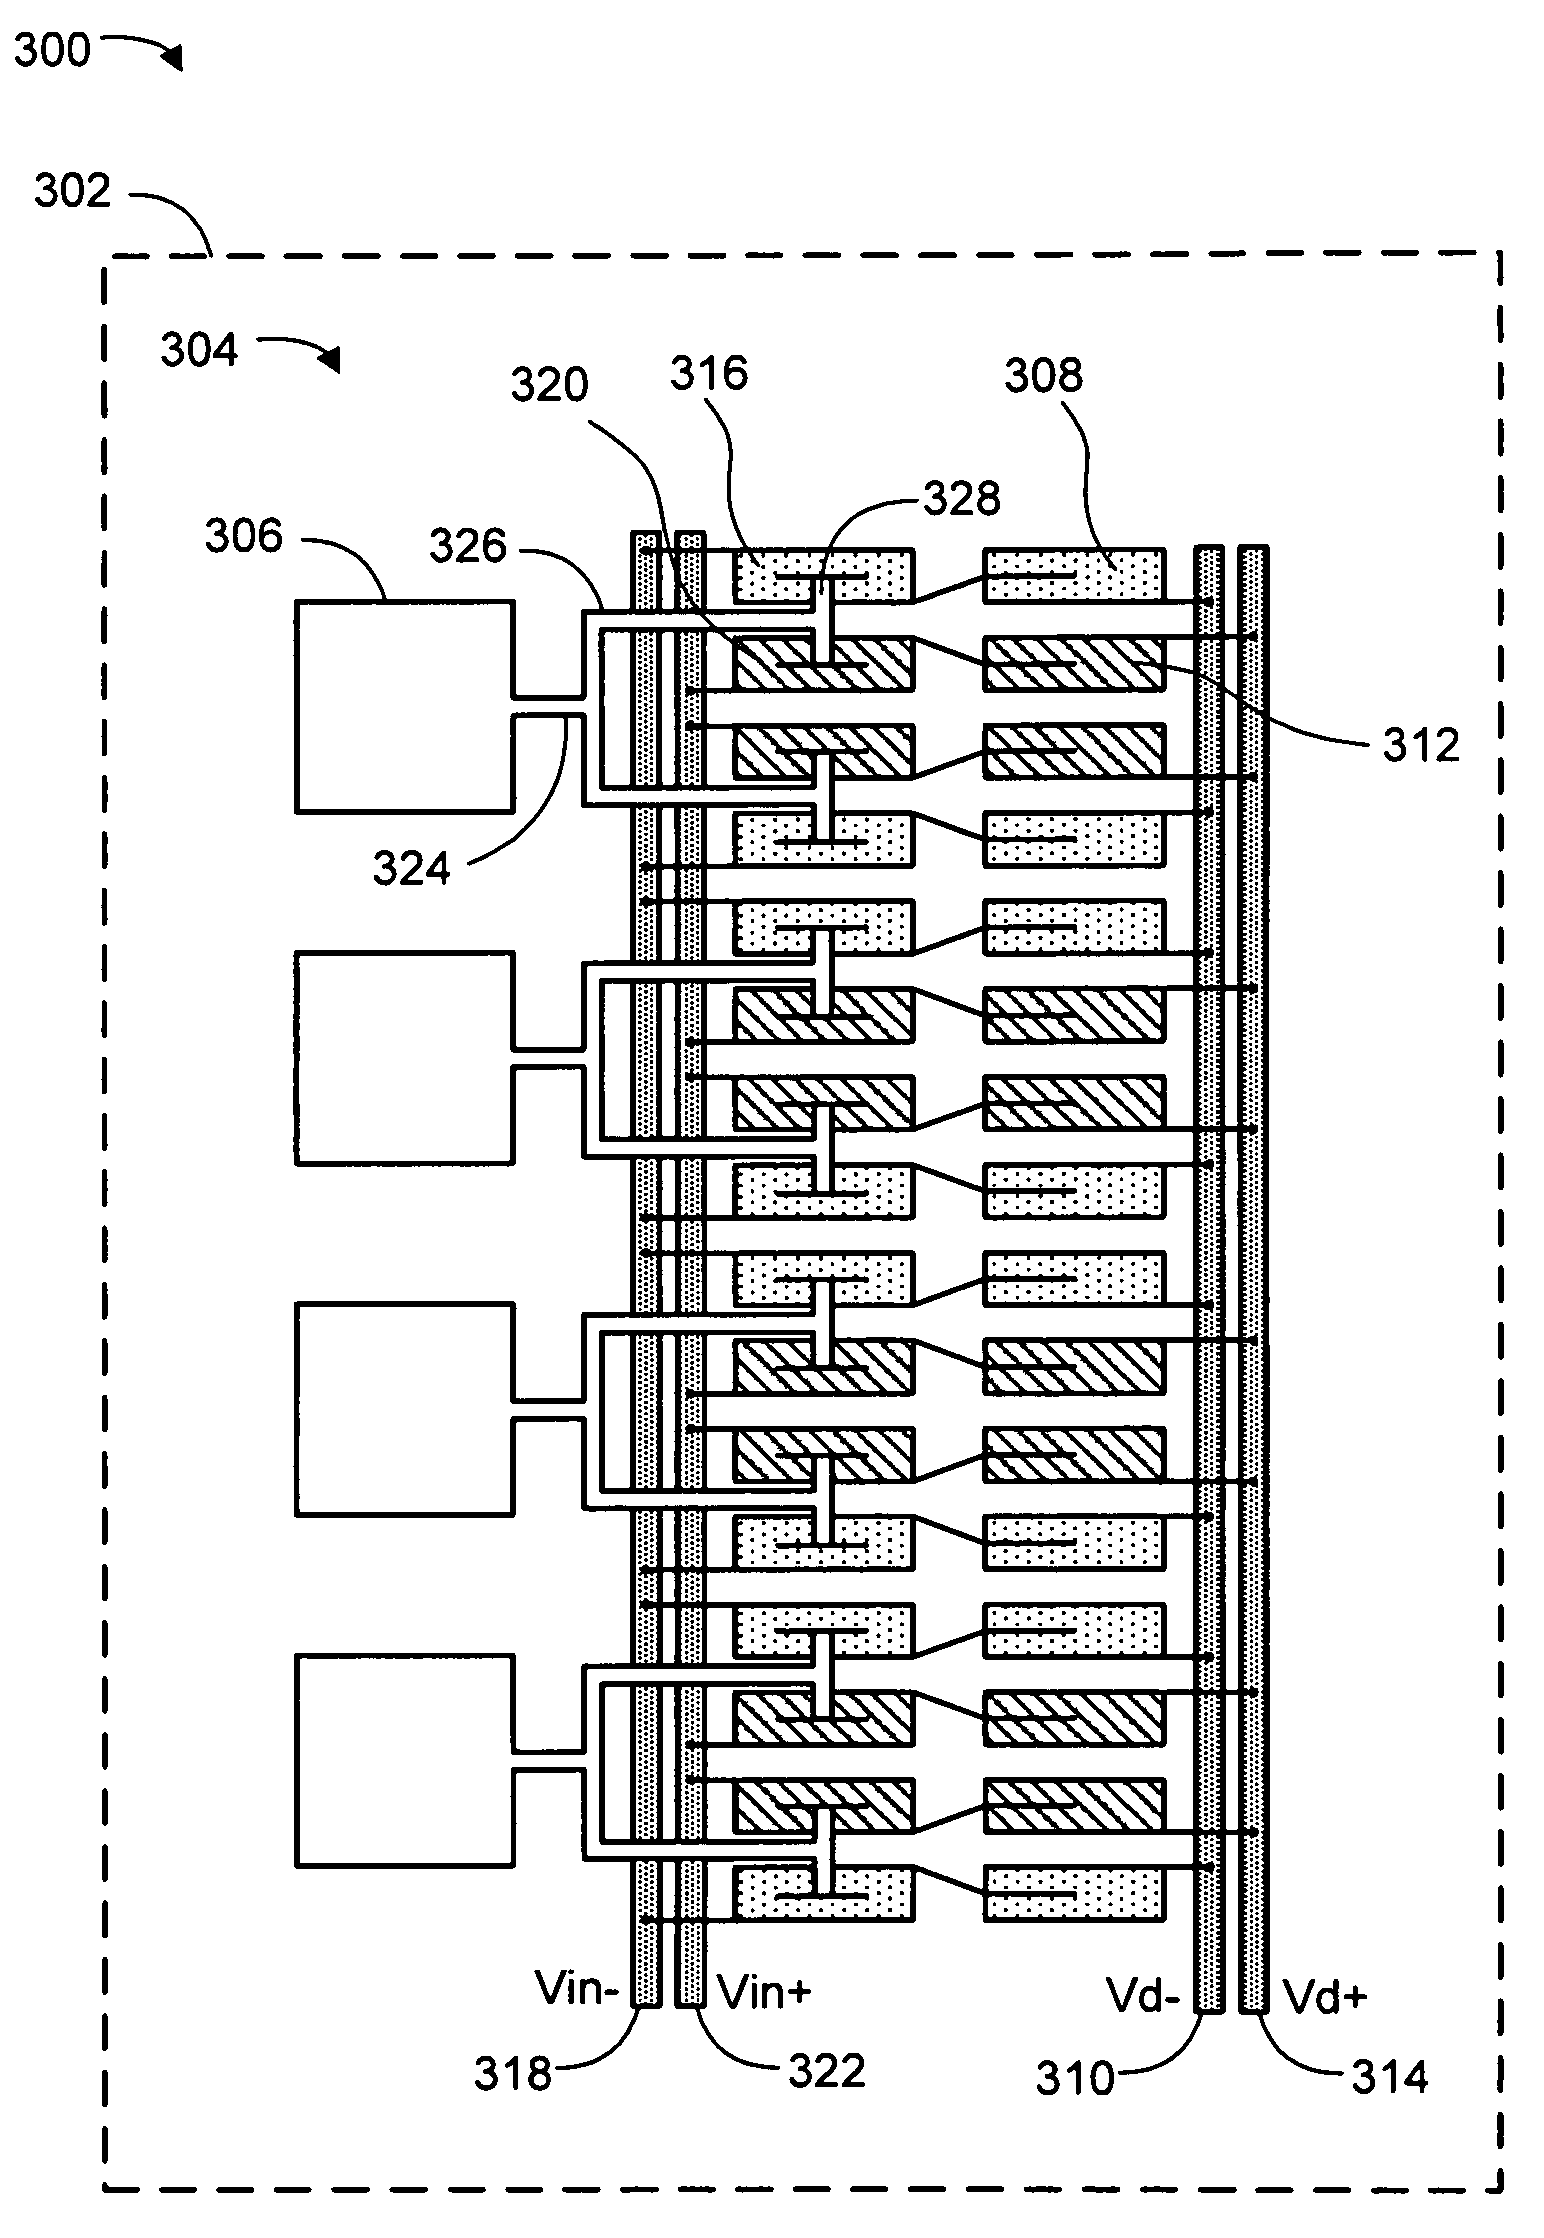 Transistor and routing layout for a radio frequency integrated CMOS power amplifier device